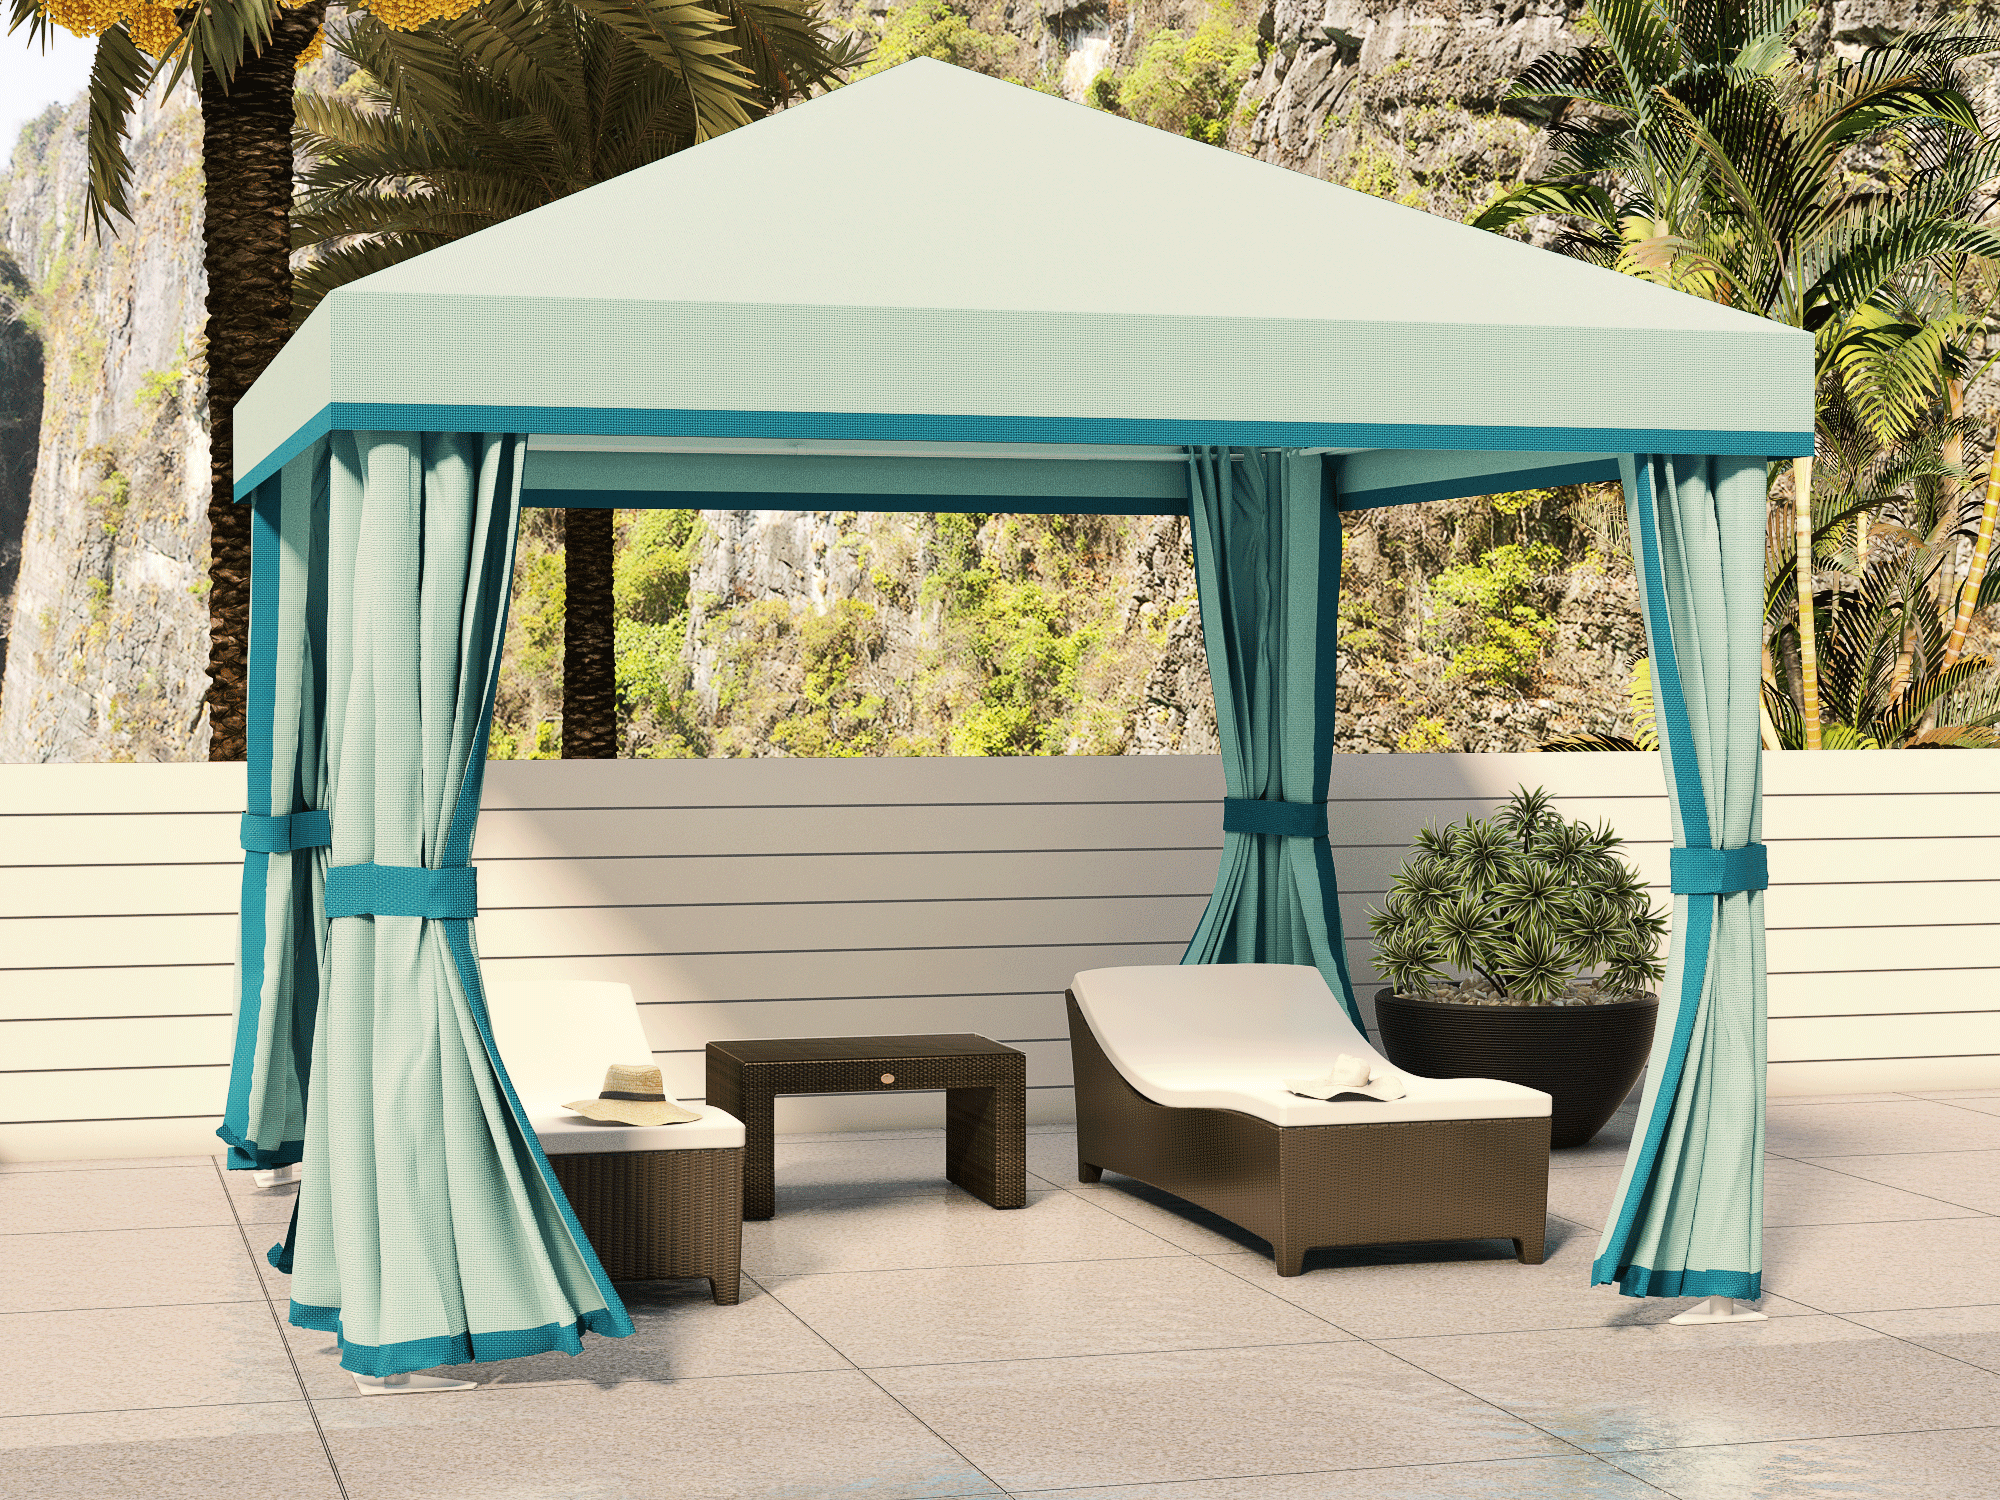 Academy Design's Presidential cabana, photo taken from the front, showcasing its corrosion-resistant 6061-T6 aluminum frame with a marine-grade fabric peaked roof featuring a hard valance. The mock curtains, made of marine-grade upholstery fabric, wrap around the structure's posts to conceal hardware, epitomizing luxury for upscale hospitality settings.